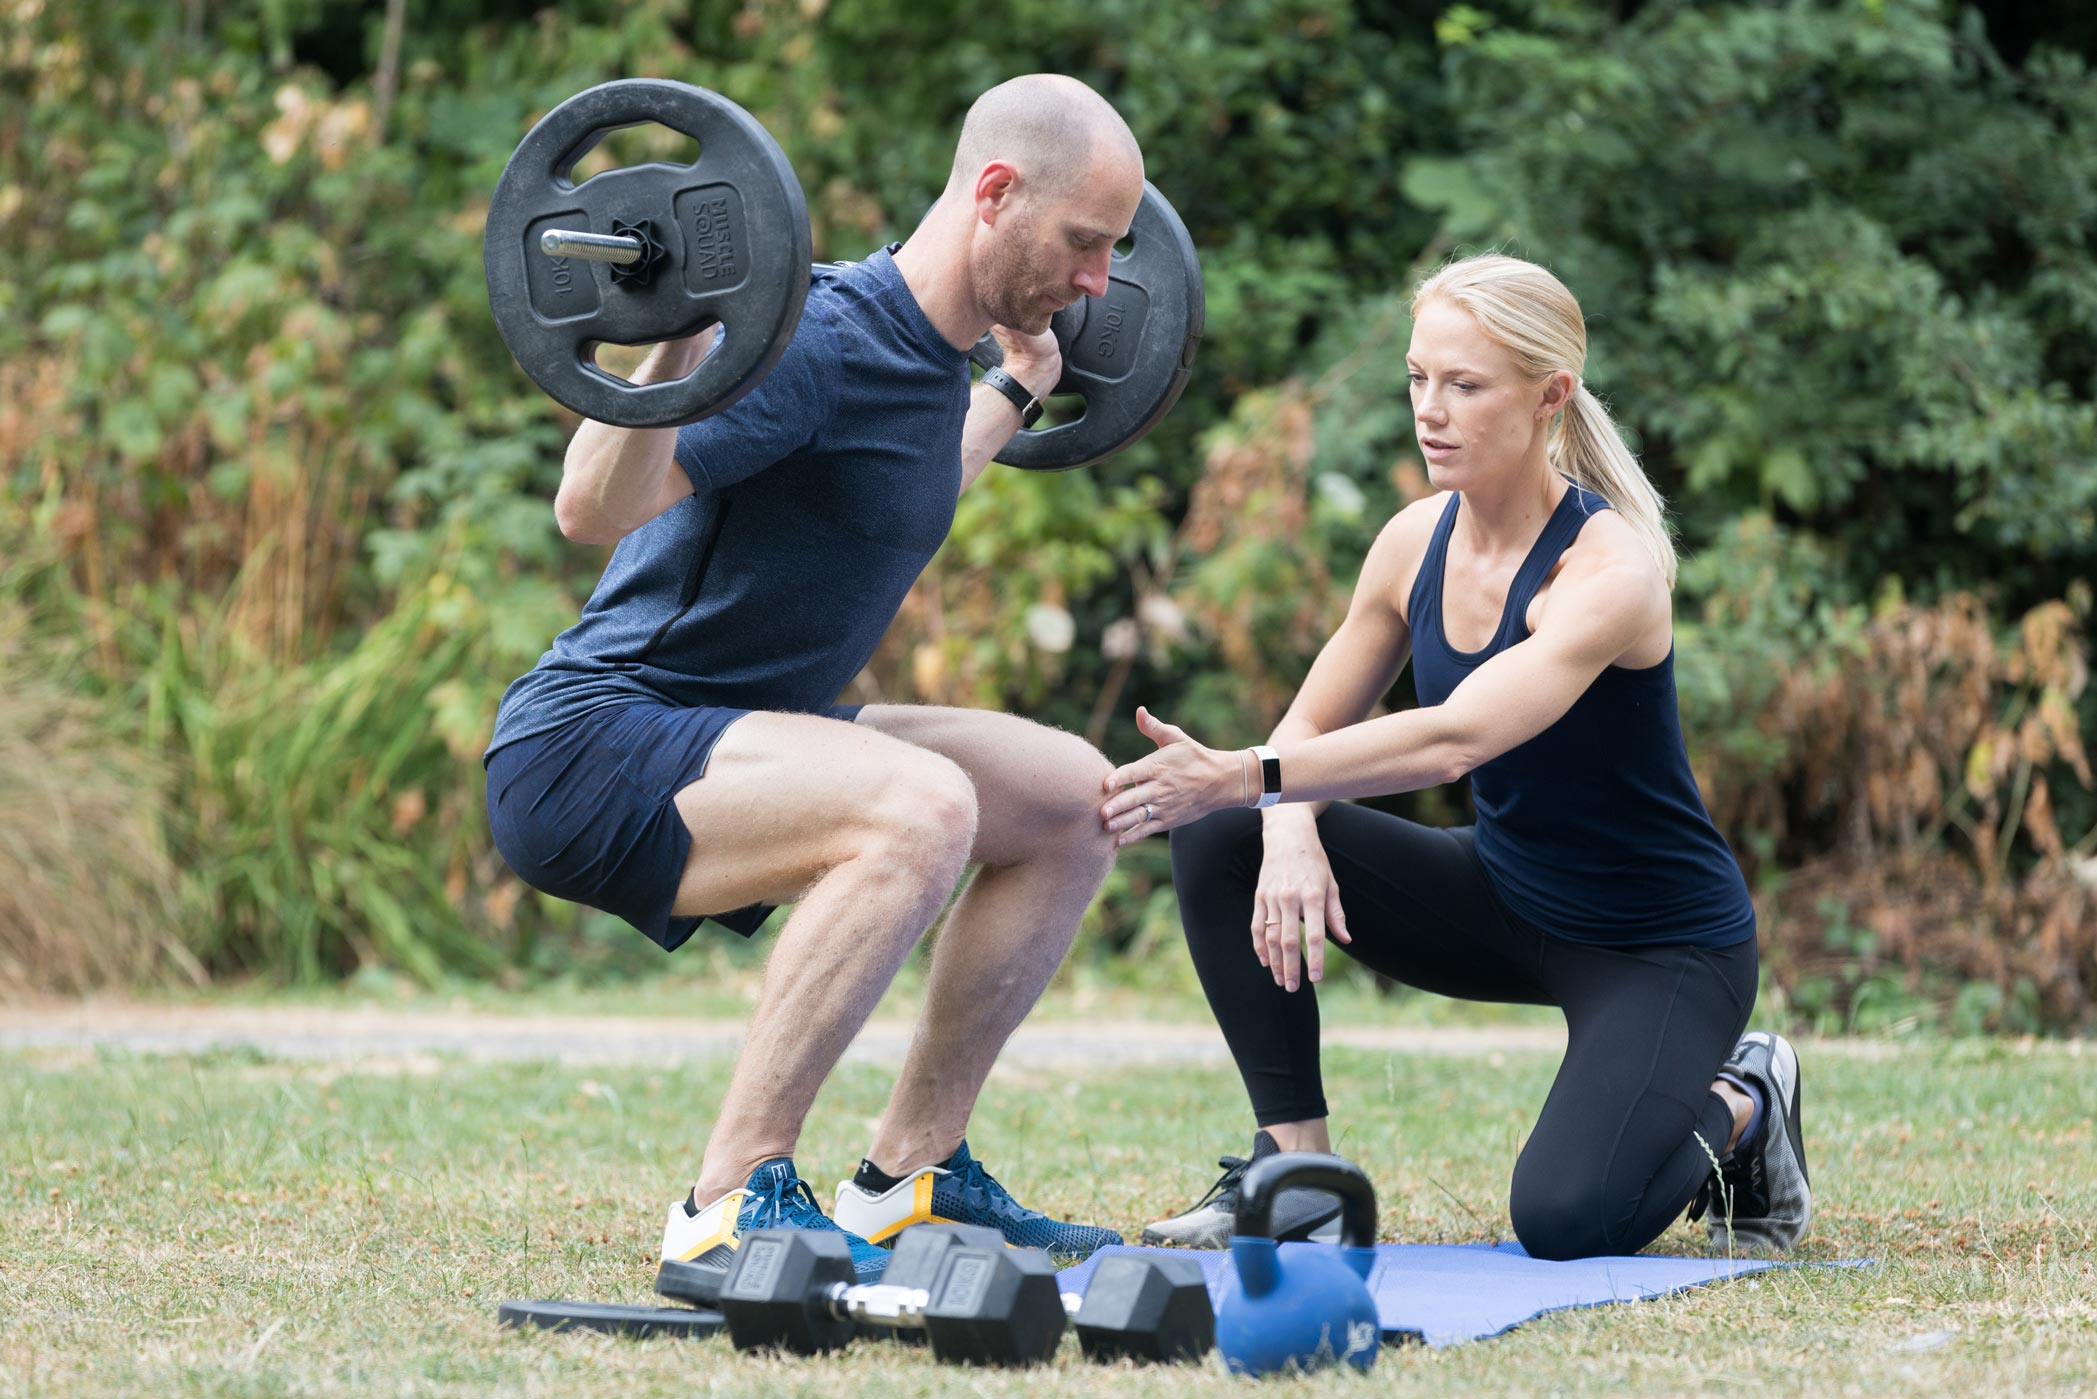 A personal trainer works with her client during a personal branding health & fitness photography shoot in Croydon, London